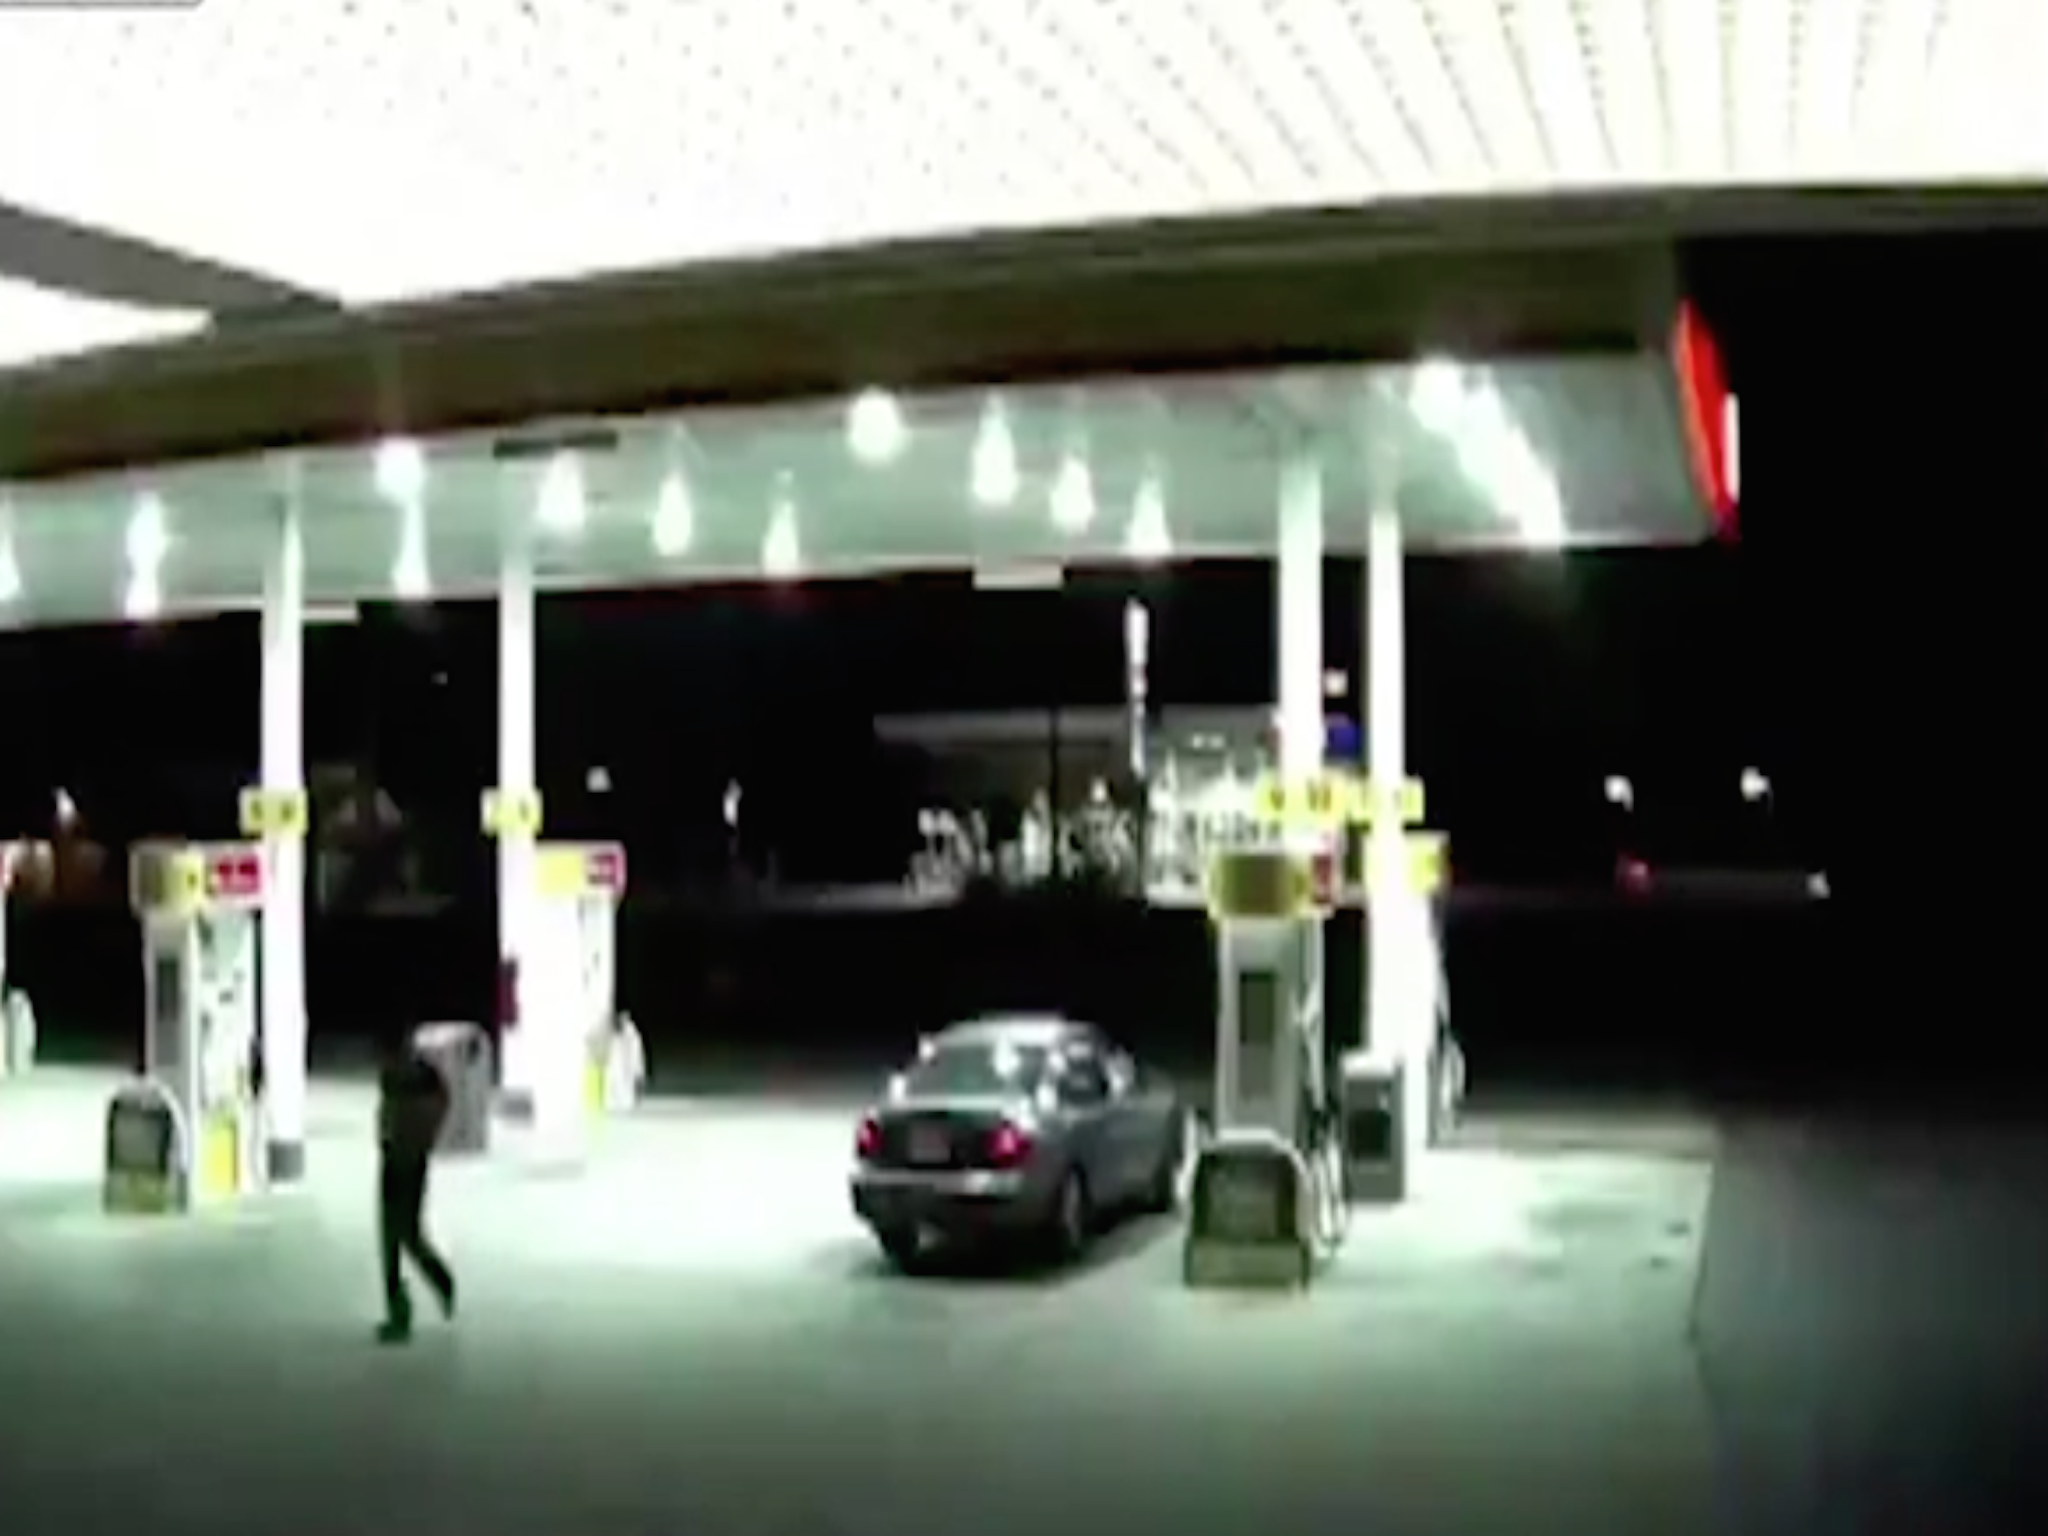 The moment when the kidnapper walks toward the gas station; LiveLeak